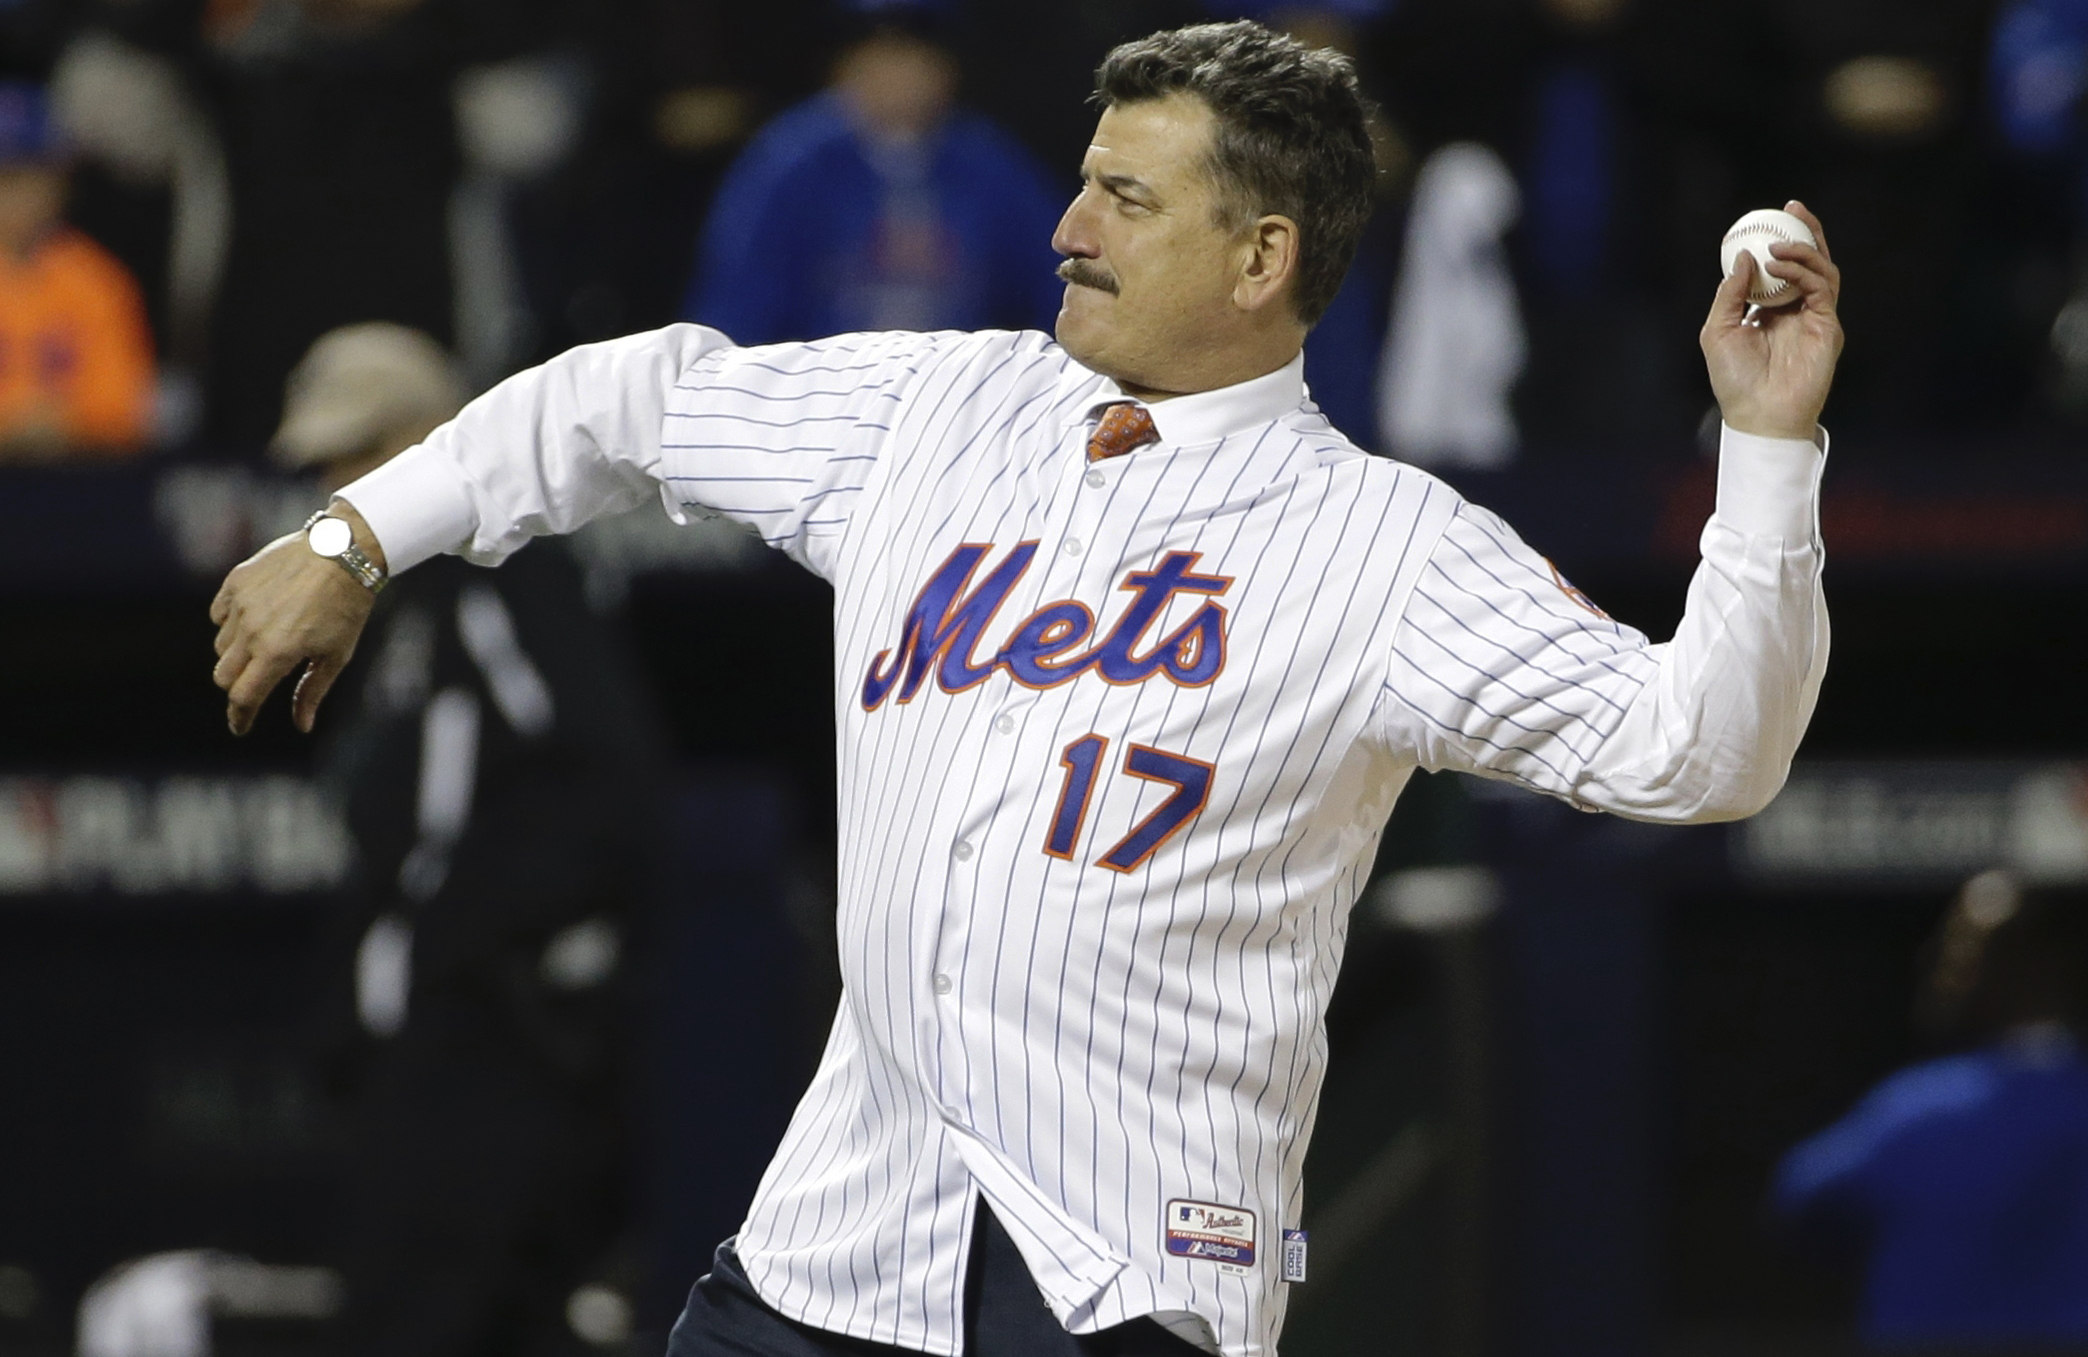 MLB rumors: Mets broadcaster Keith Hernandez back after scary home